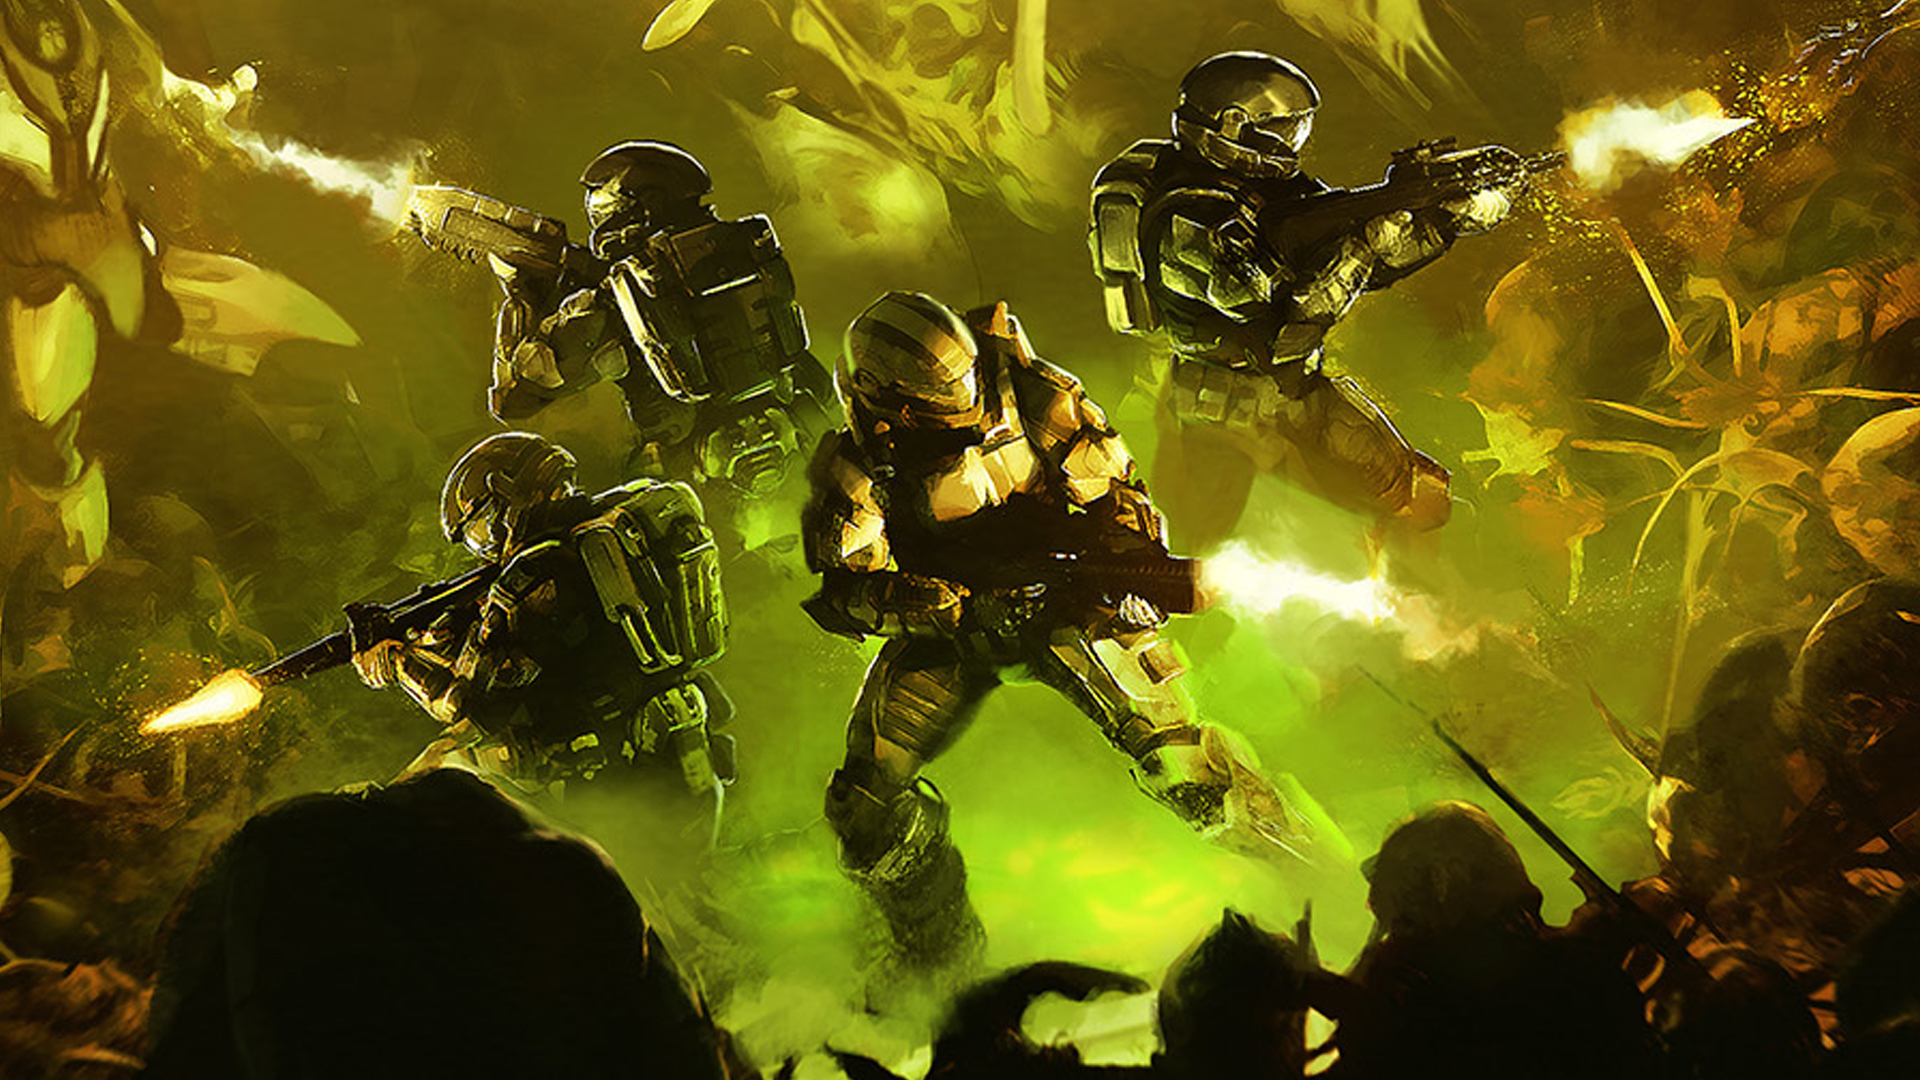 Halo MCC update brings Flood Firefight and Halo 3 crossplay